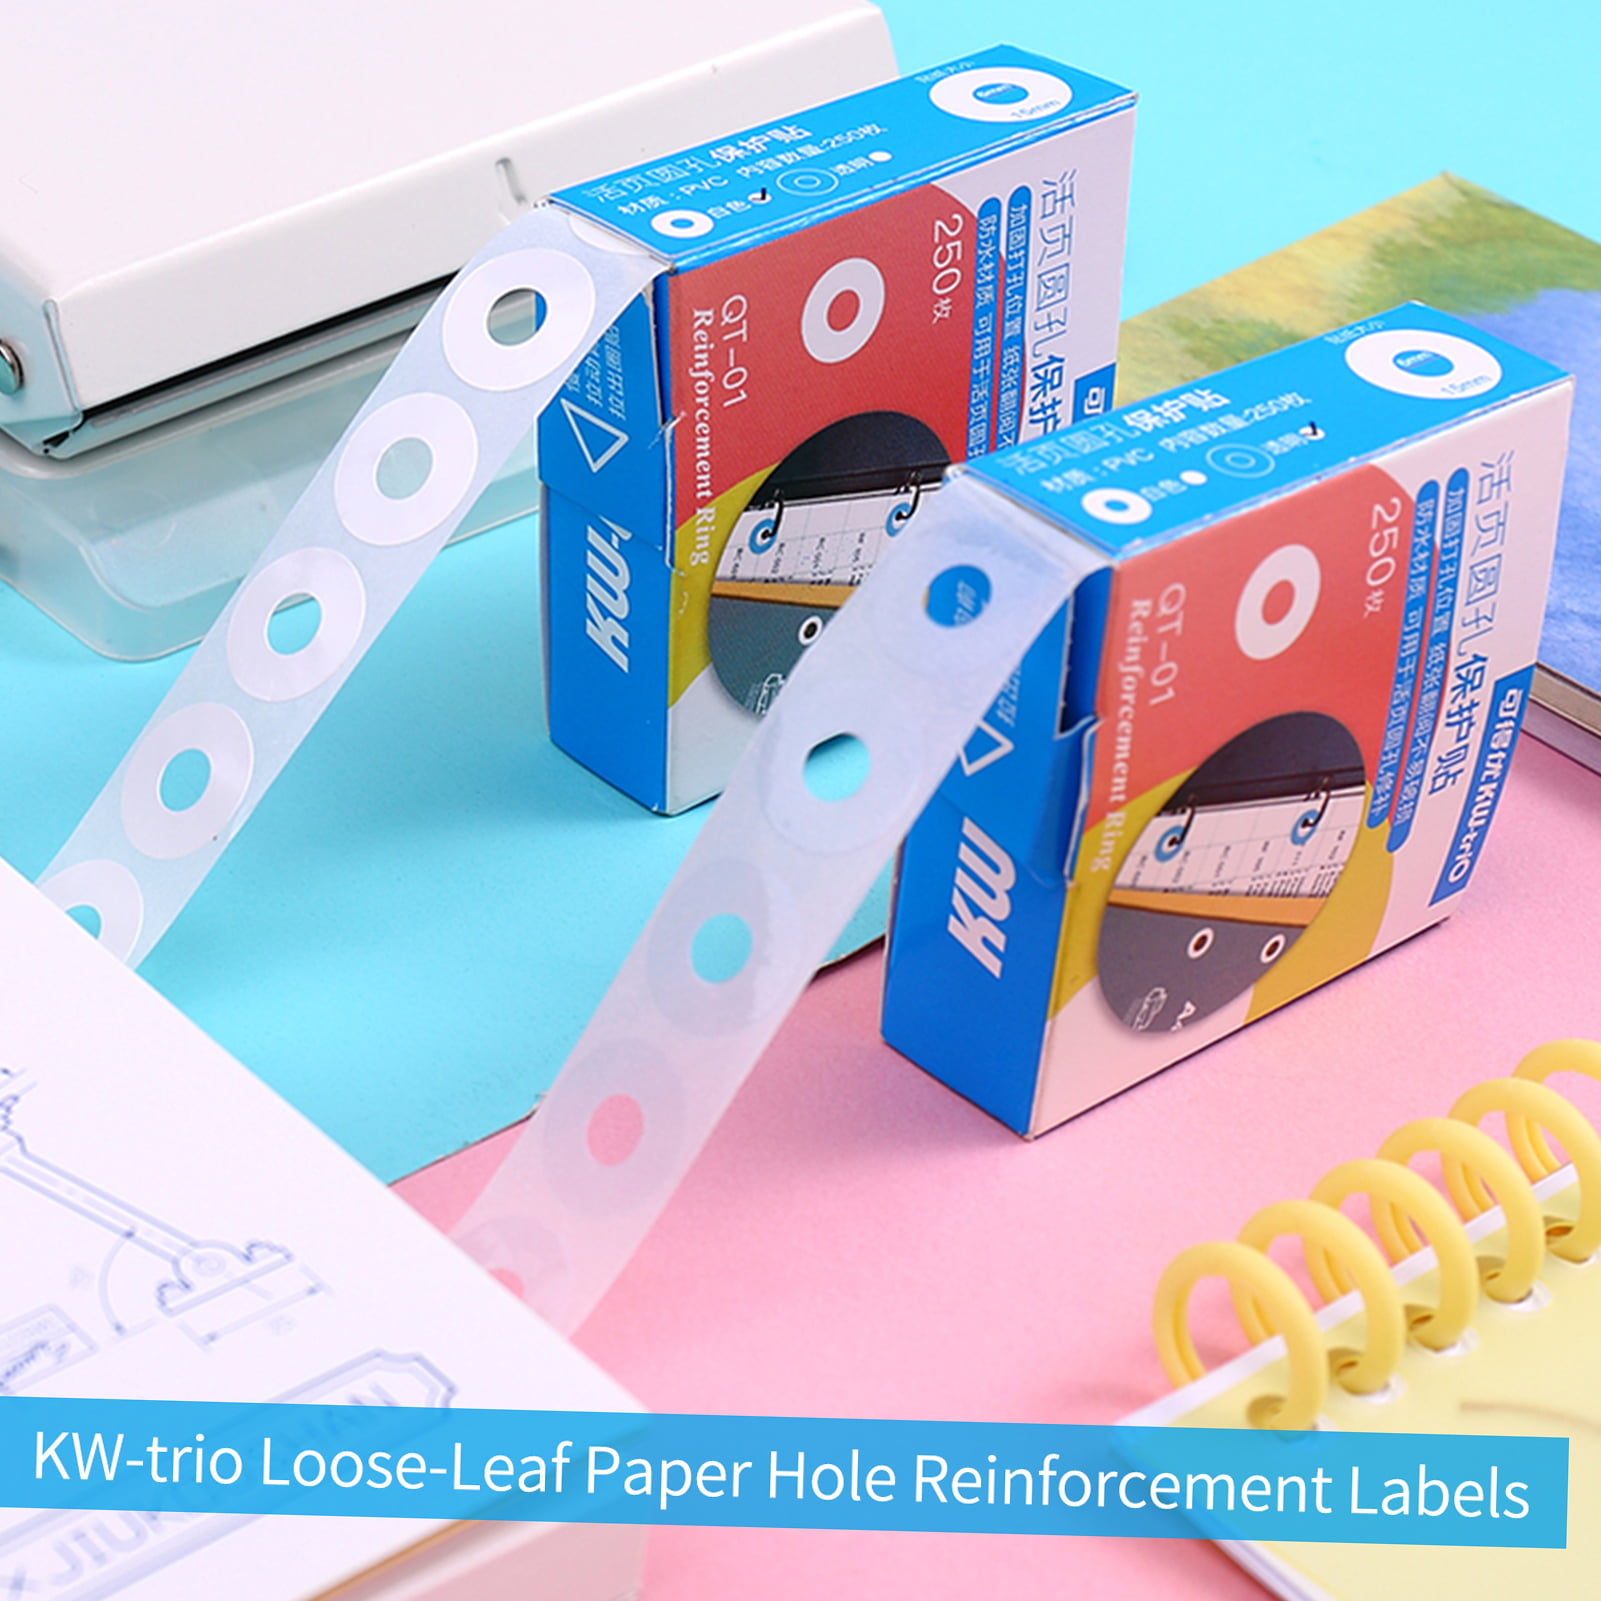 Reinforcement Stickers For Loose Leaf Paper Hole – ViVi Stationery